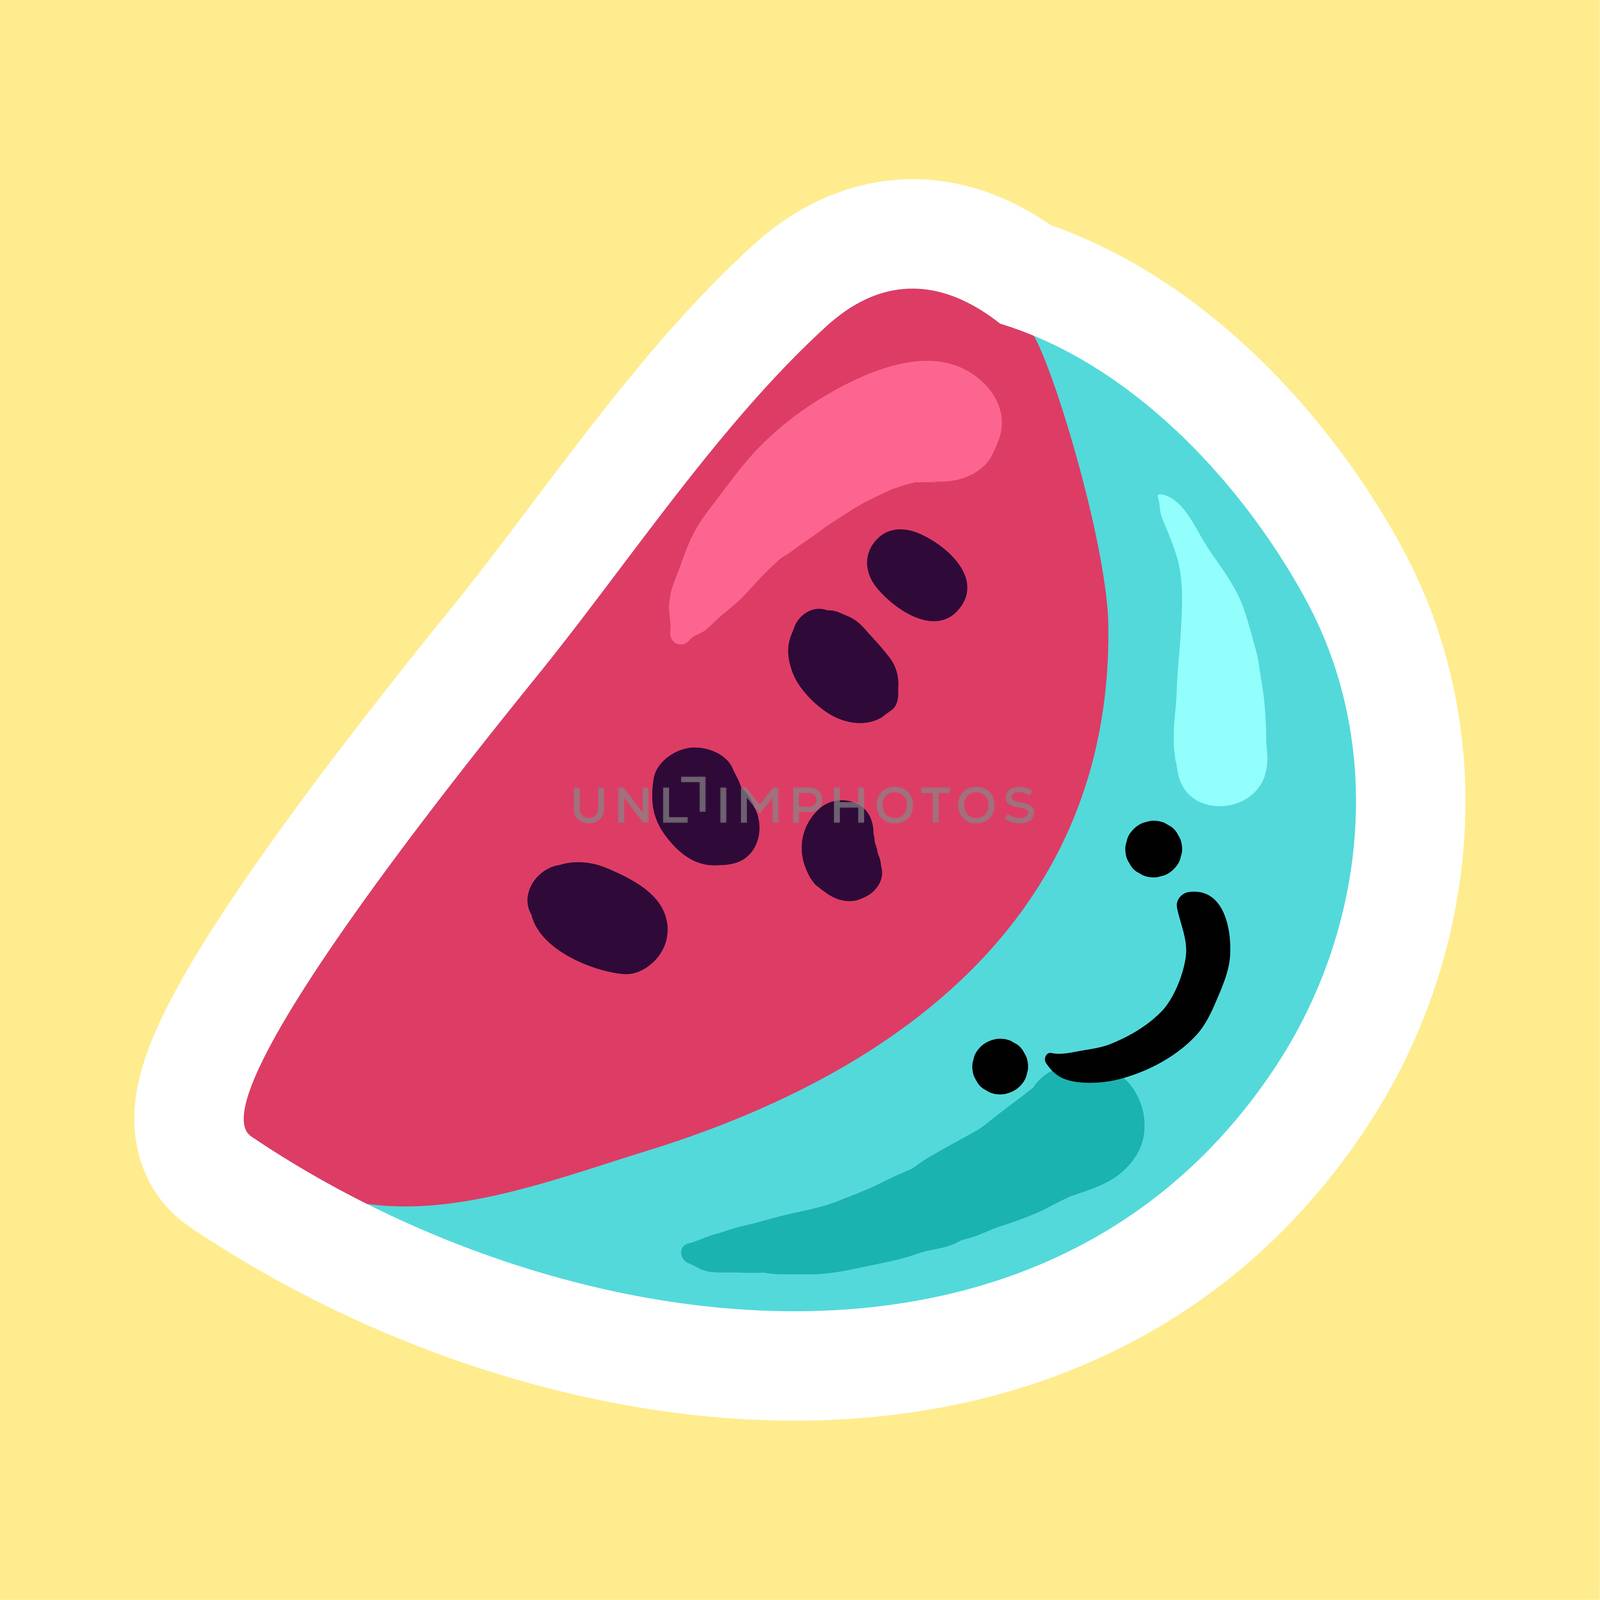 Sticker with berry. Cheerful smiling watermelon. Symbol of summer. Dessert and sweet food sign. Fashionable patch. Vector